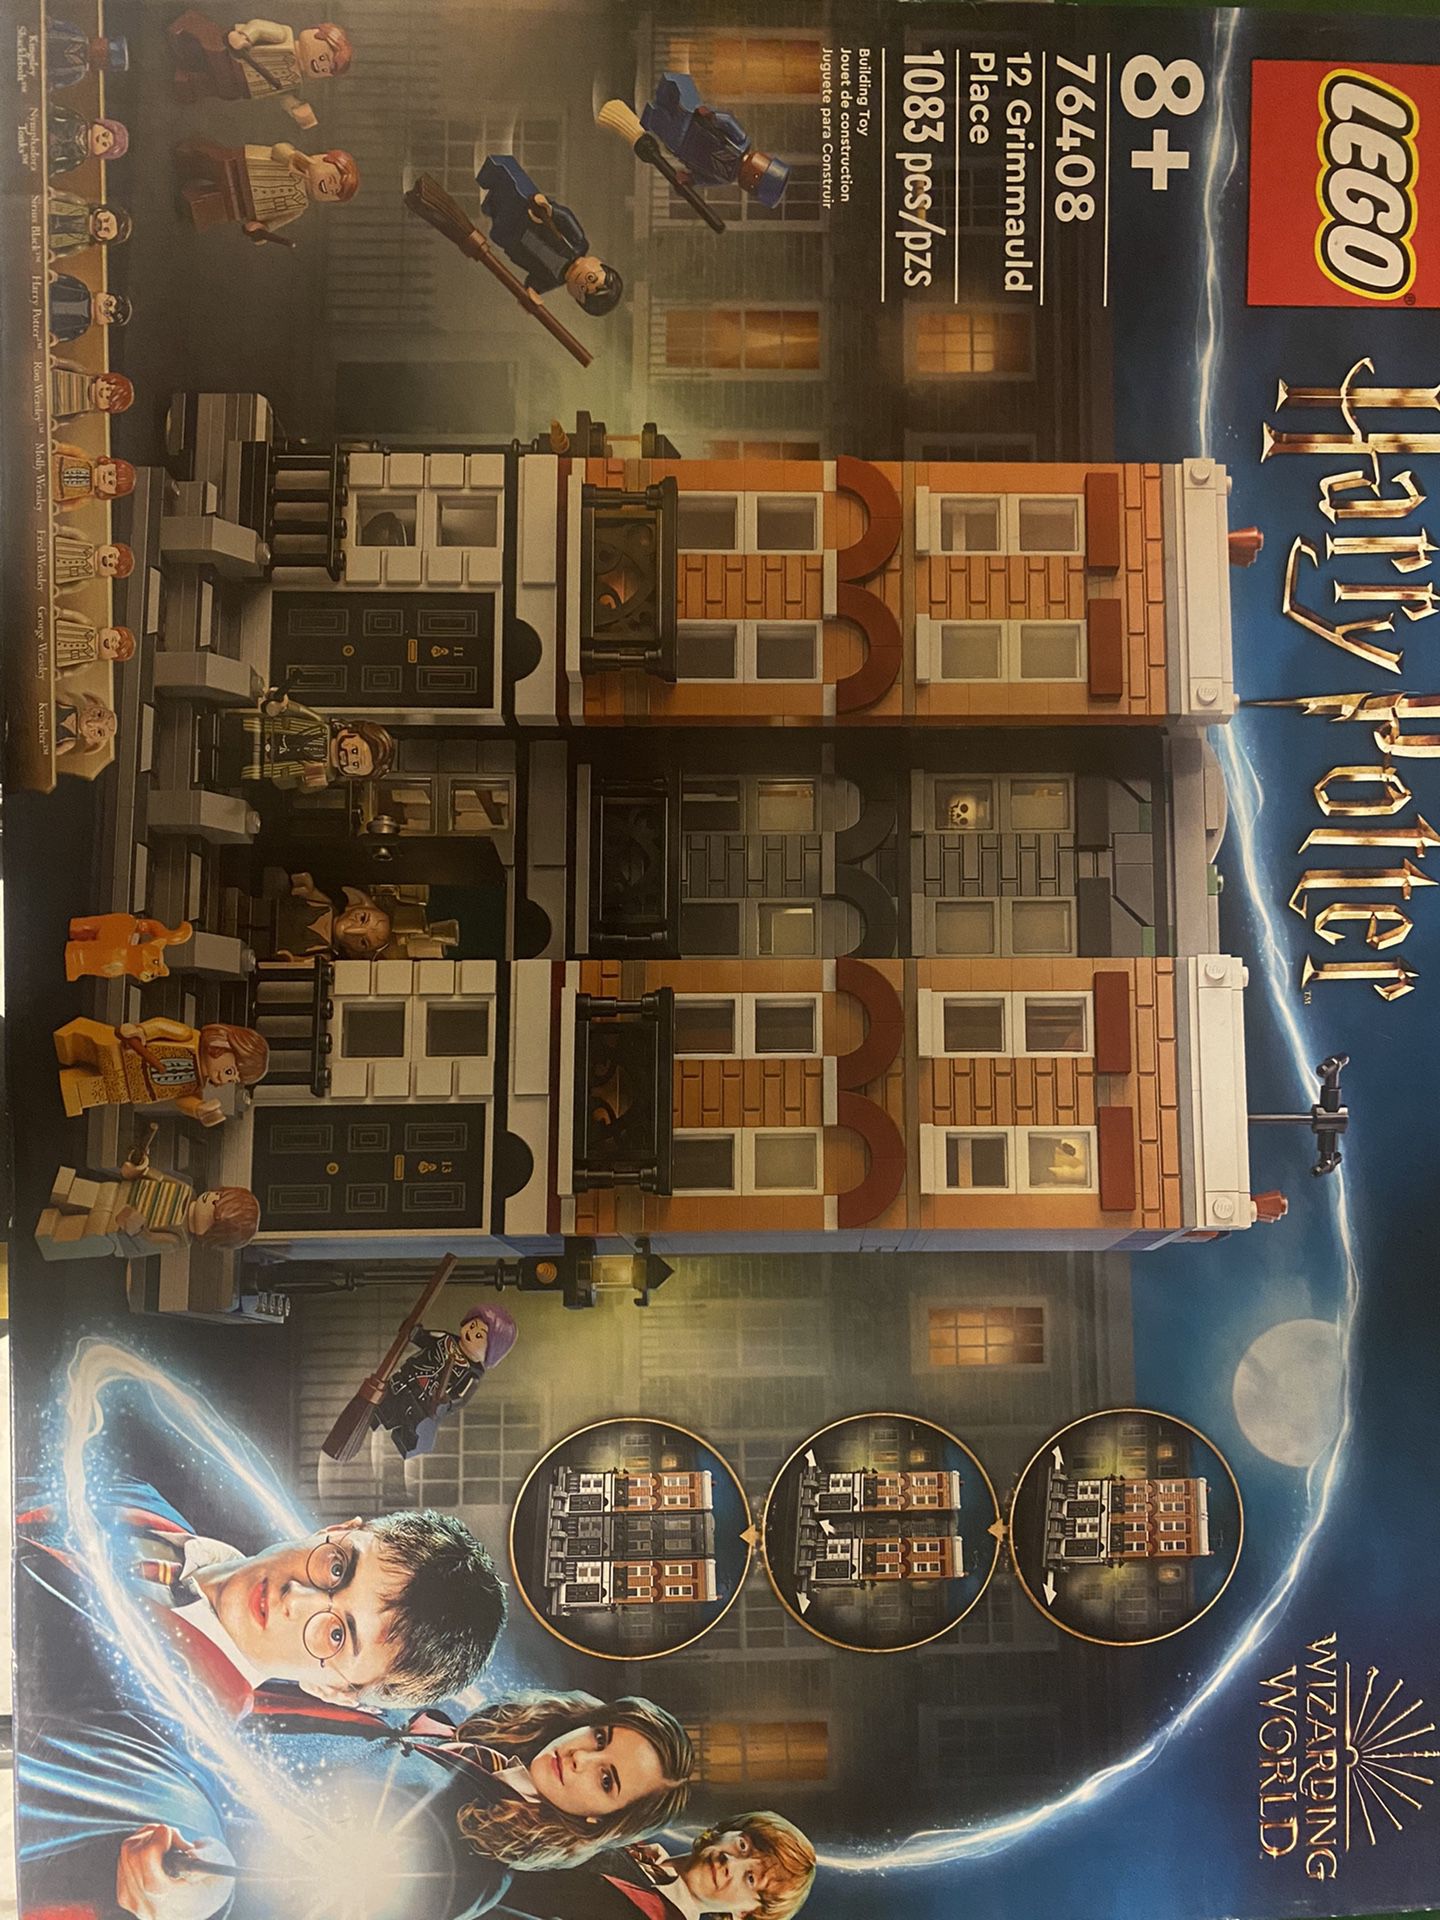 Harry Potter 12 Grimmauld Place LEGO